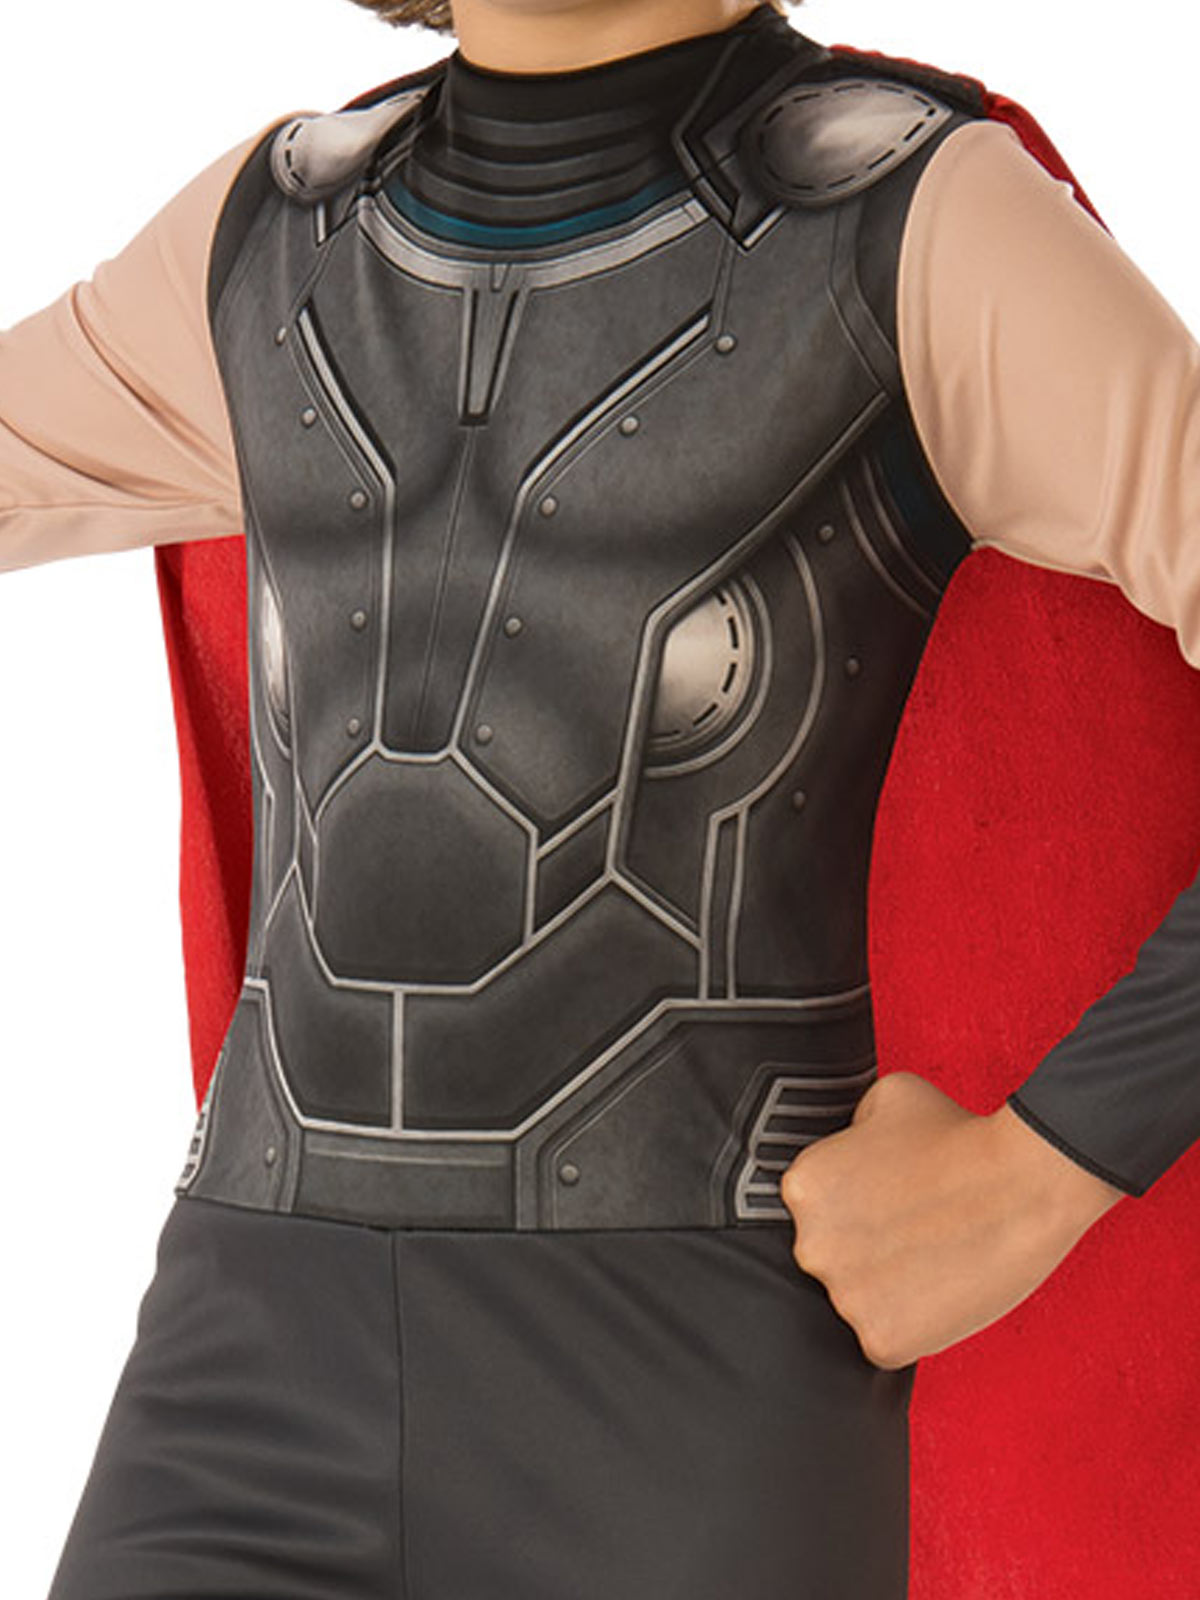 Classic Muscle Thor Avengers Costume for Kids 